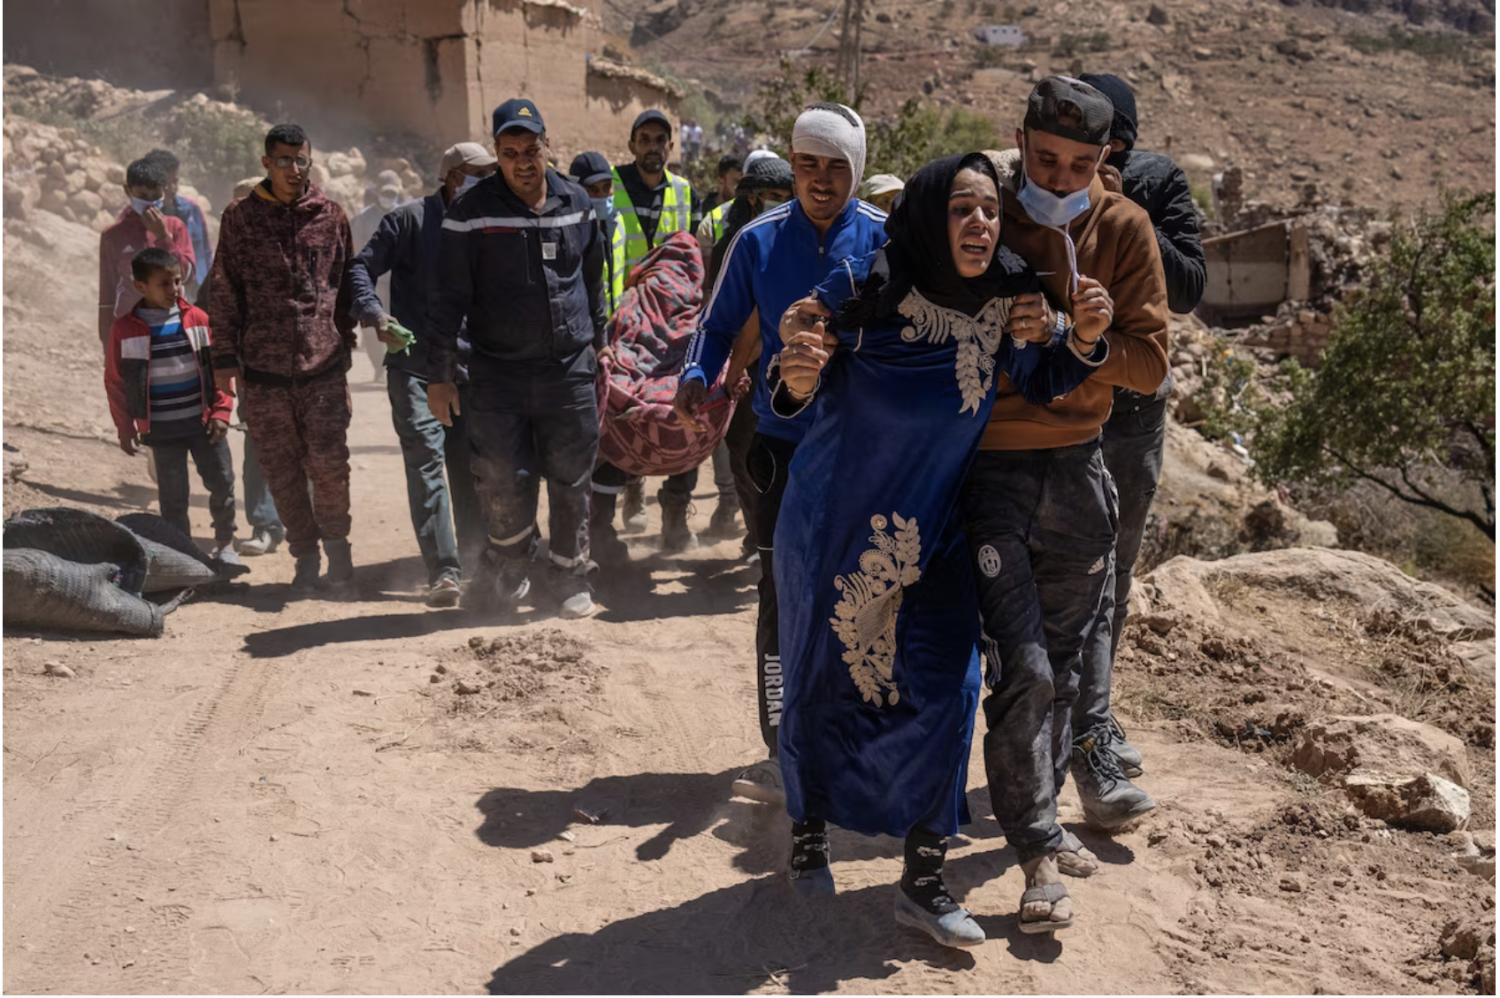 A woman is overcome with grief as her husband's body is carried for burial after being removed from beneath a collapsed house in Douzrou, Morocco, on Monday. (Carl Court/Getty Images)